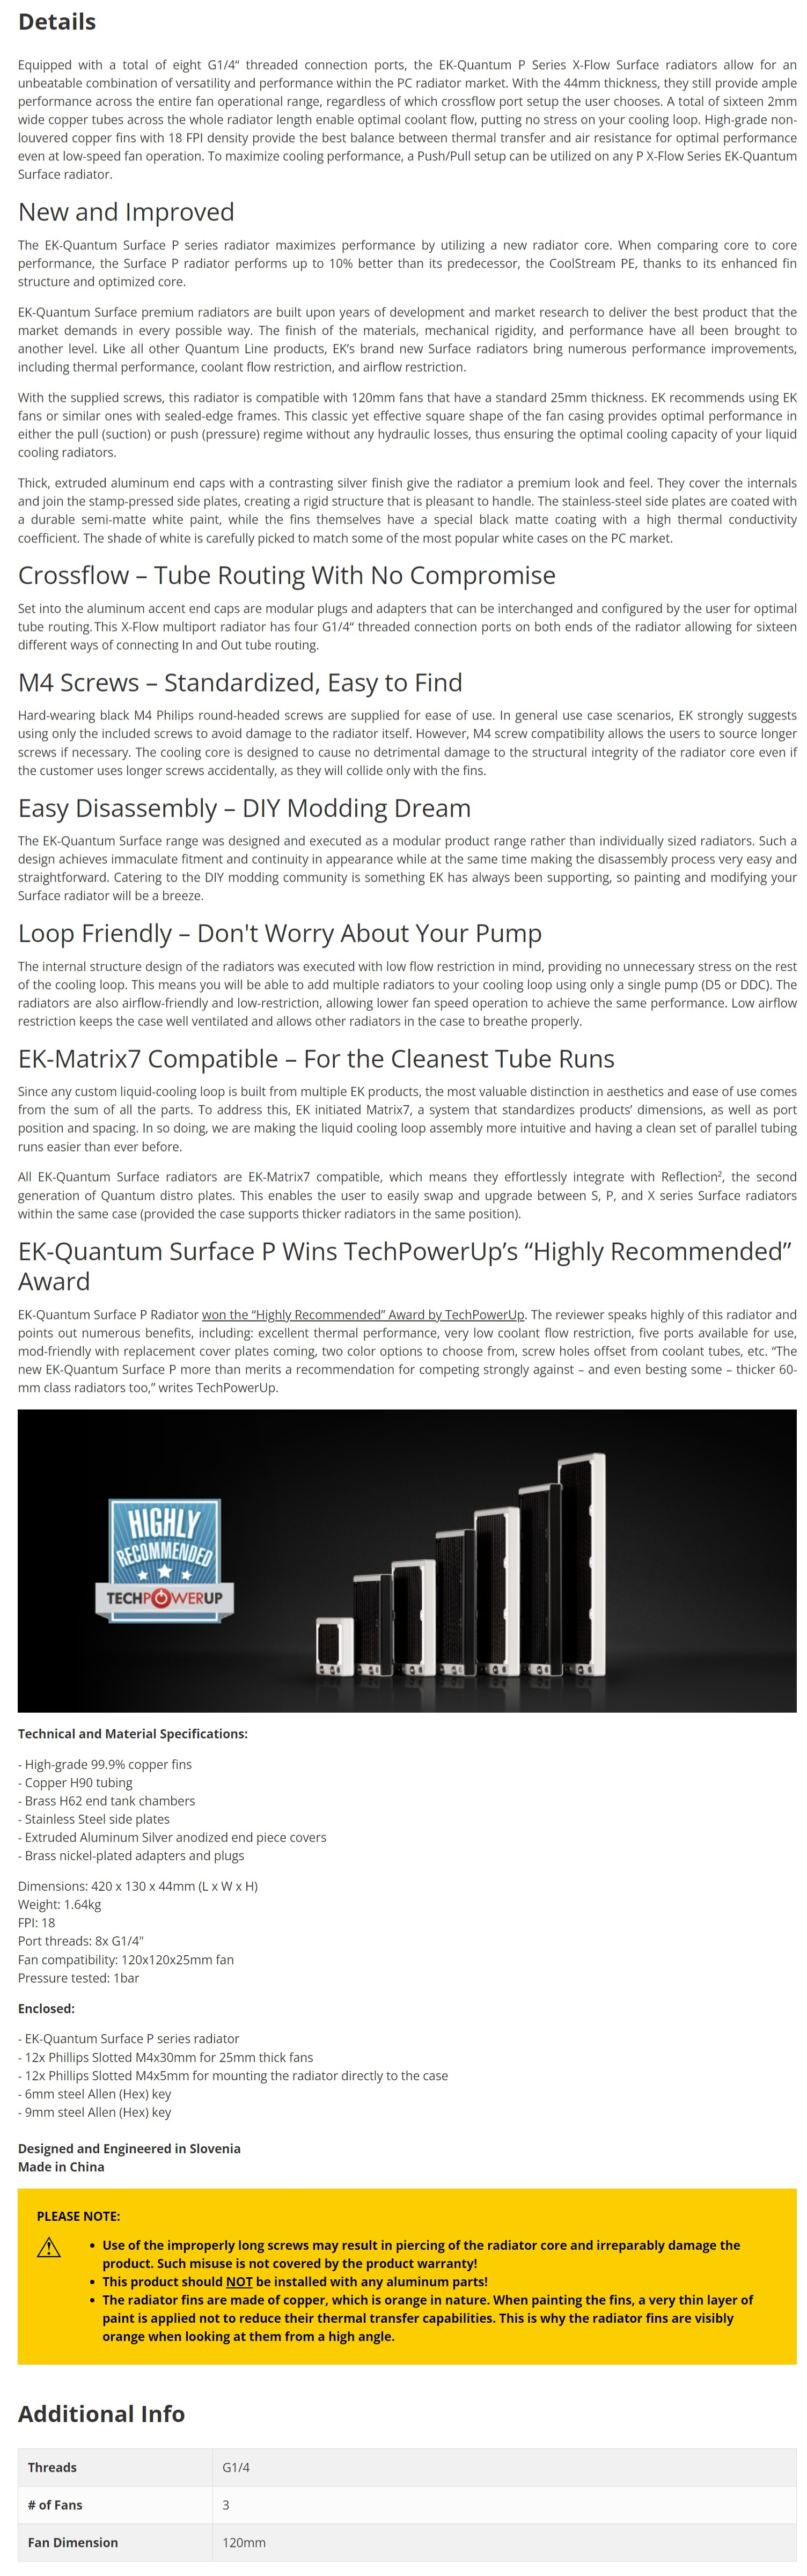 A large marketing image providing additional information about the product EK Quantum Surface P360M X-Flow - White - Additional alt info not provided